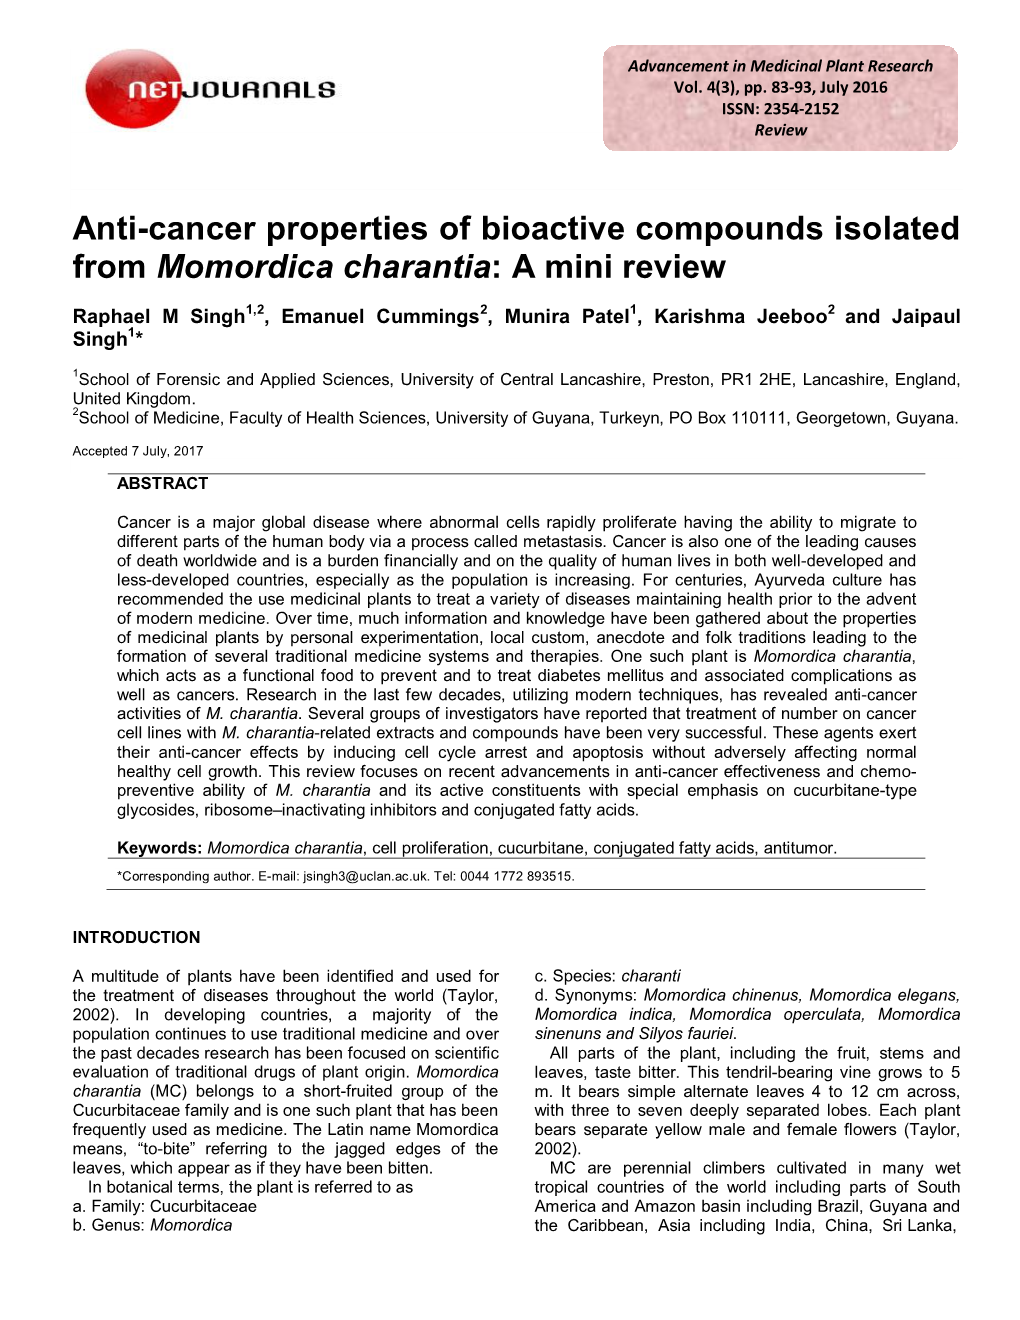 Anti-Cancer Properties of Bioactive Compounds Isolated from Momordica Charantia: a Mini Review